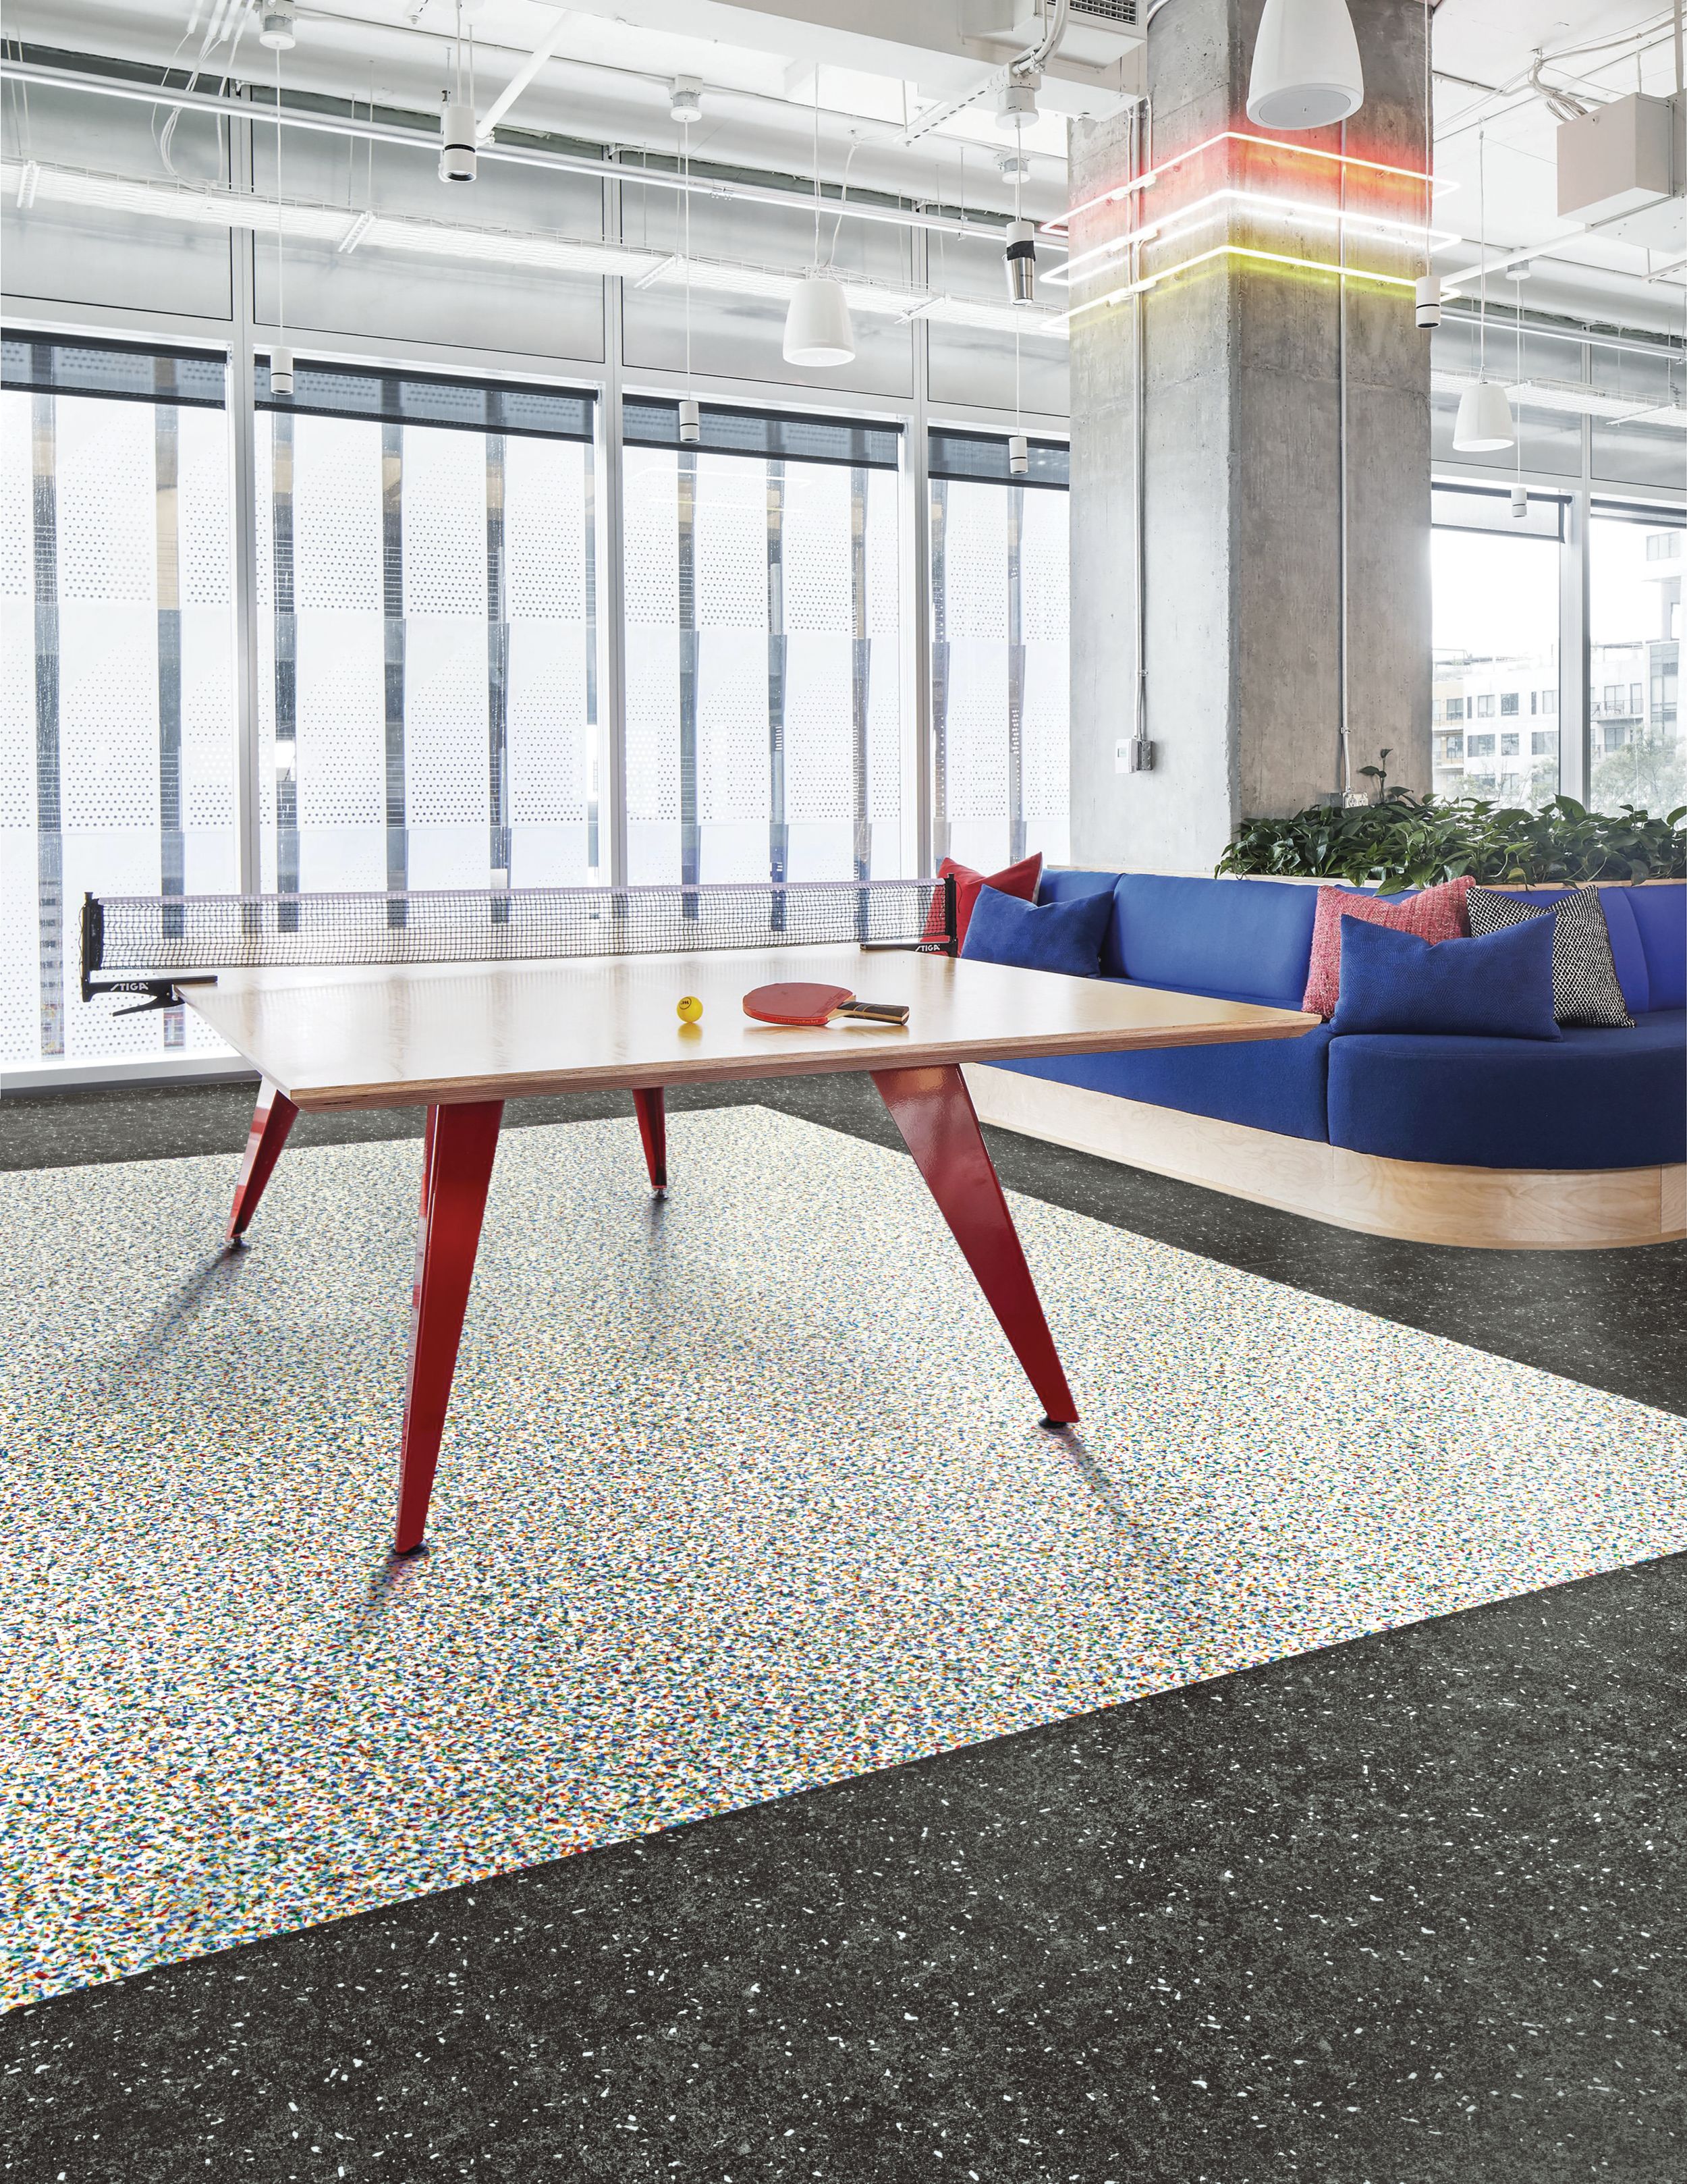 Interface Walk on By, Polychrome and Walk the Aisle LVT in a lobby space número de imagen 3